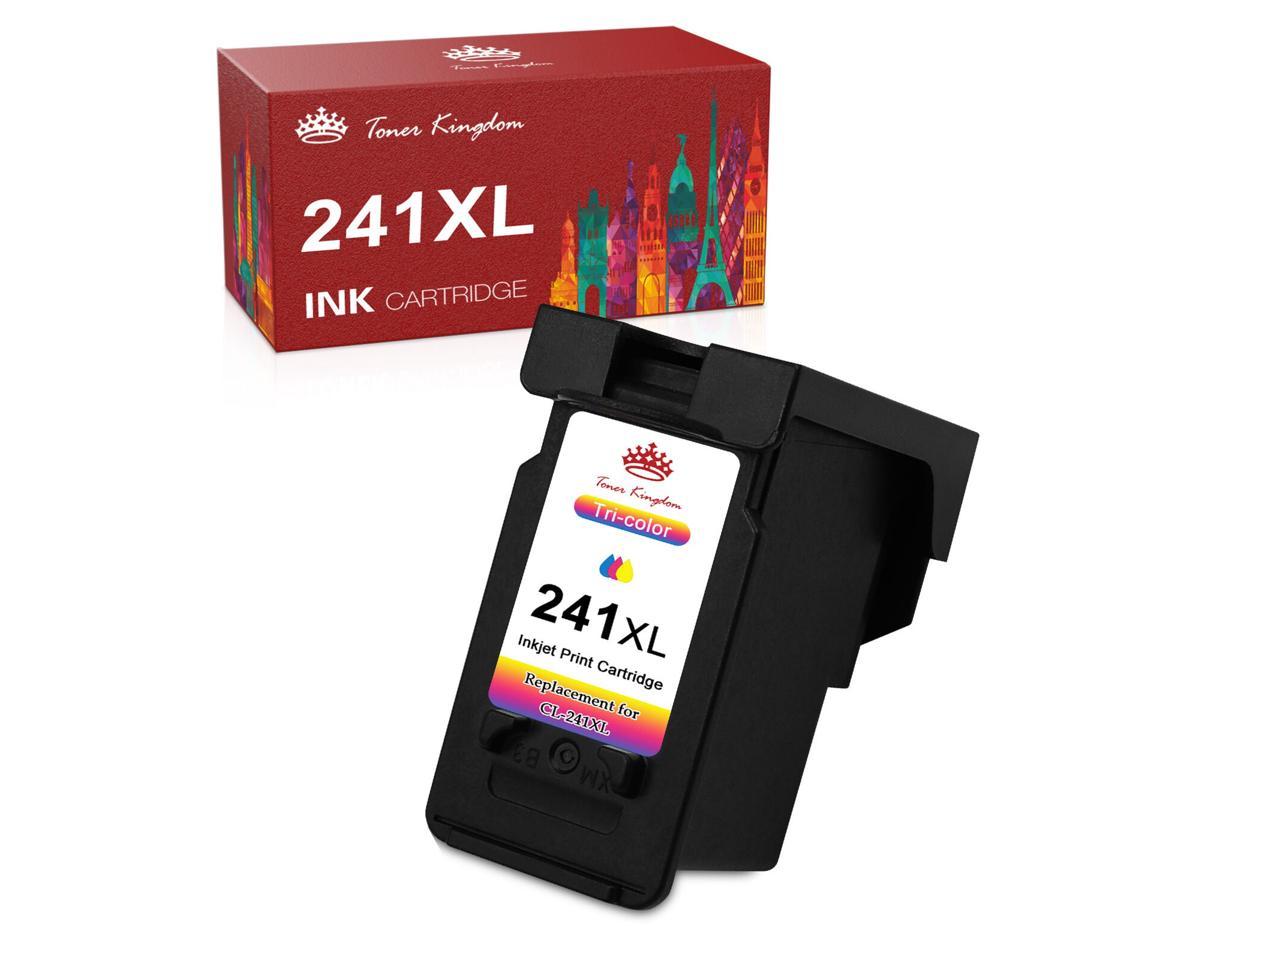 canon pixma mg2120 inkjet photo all in one printer ink